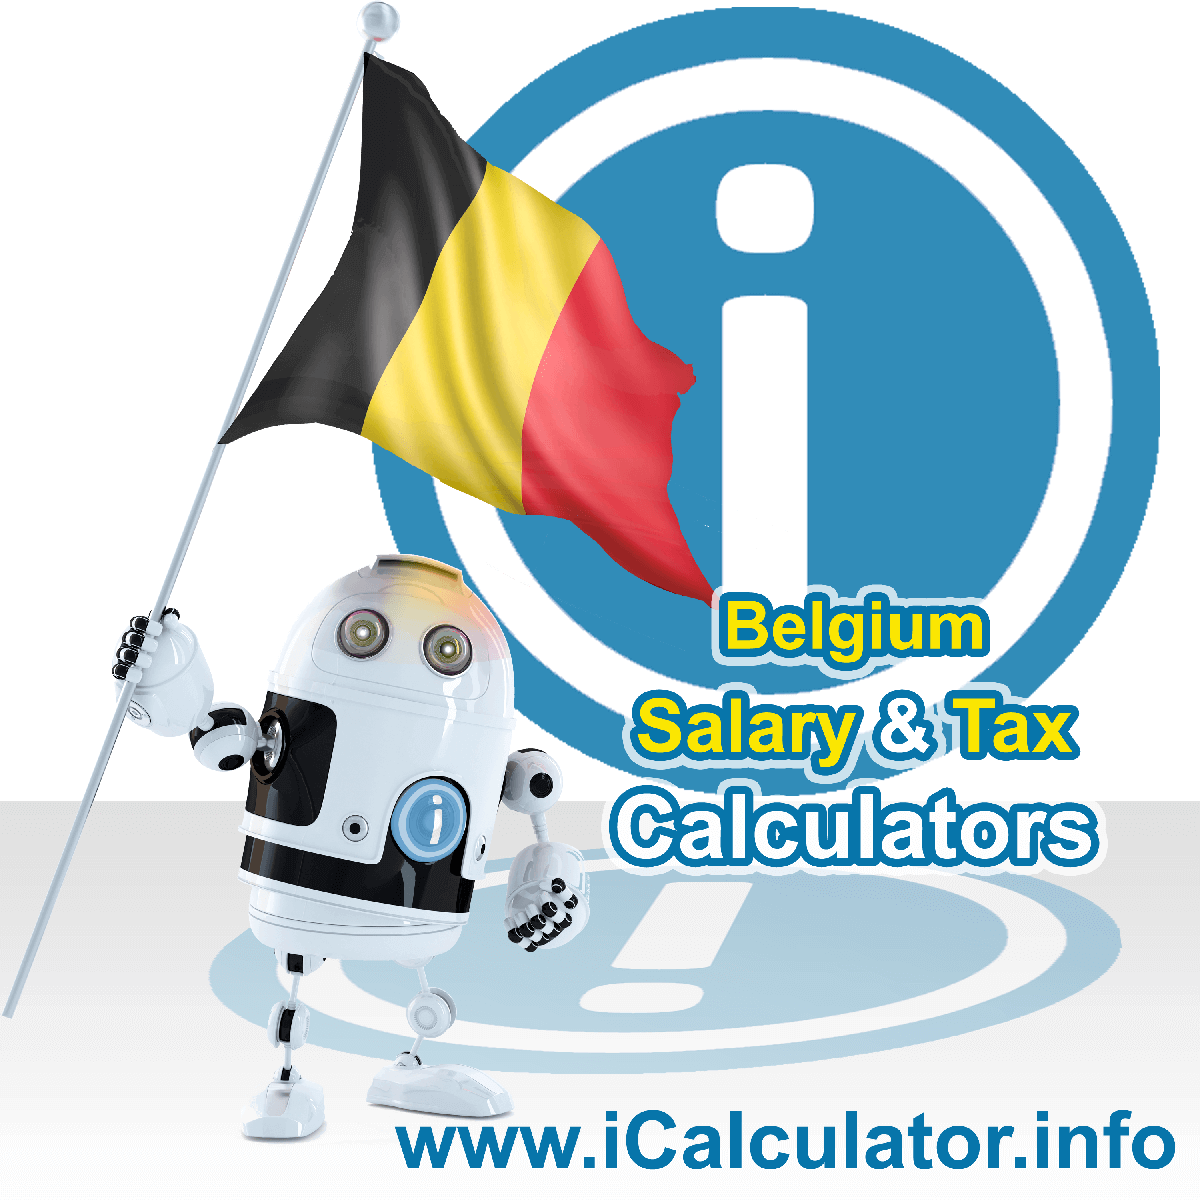 Belgium Salary Calculator. This image shows the Belgiumese flag and information relating to the tax formula for the Belgium Tax Calculator